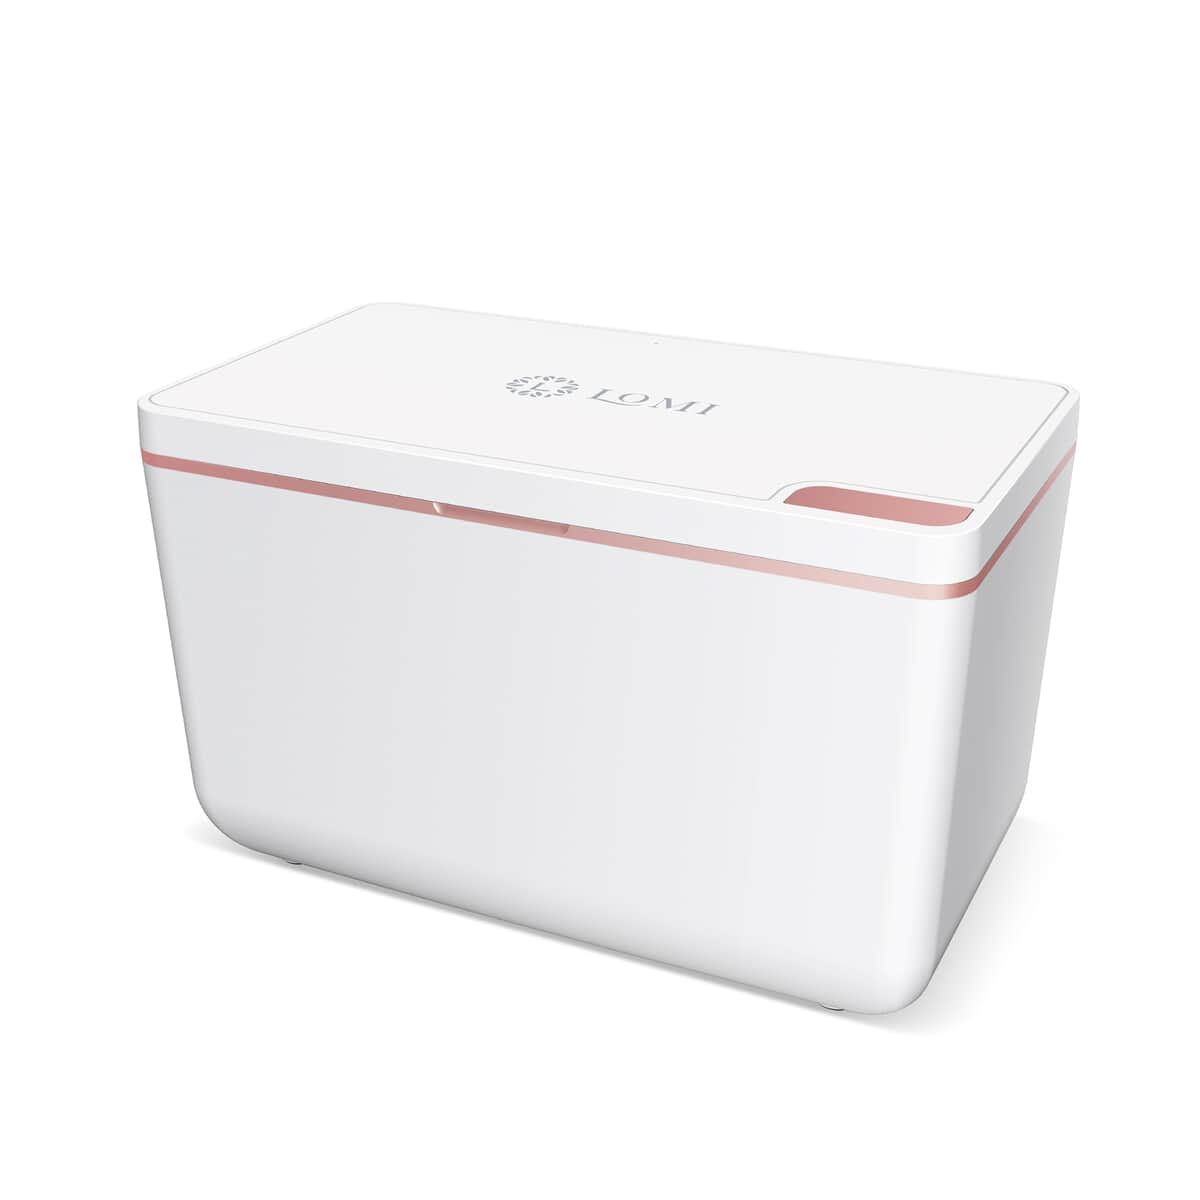 Lomi UV-C Light Self-Cleaning Makeup Box - White image number 3